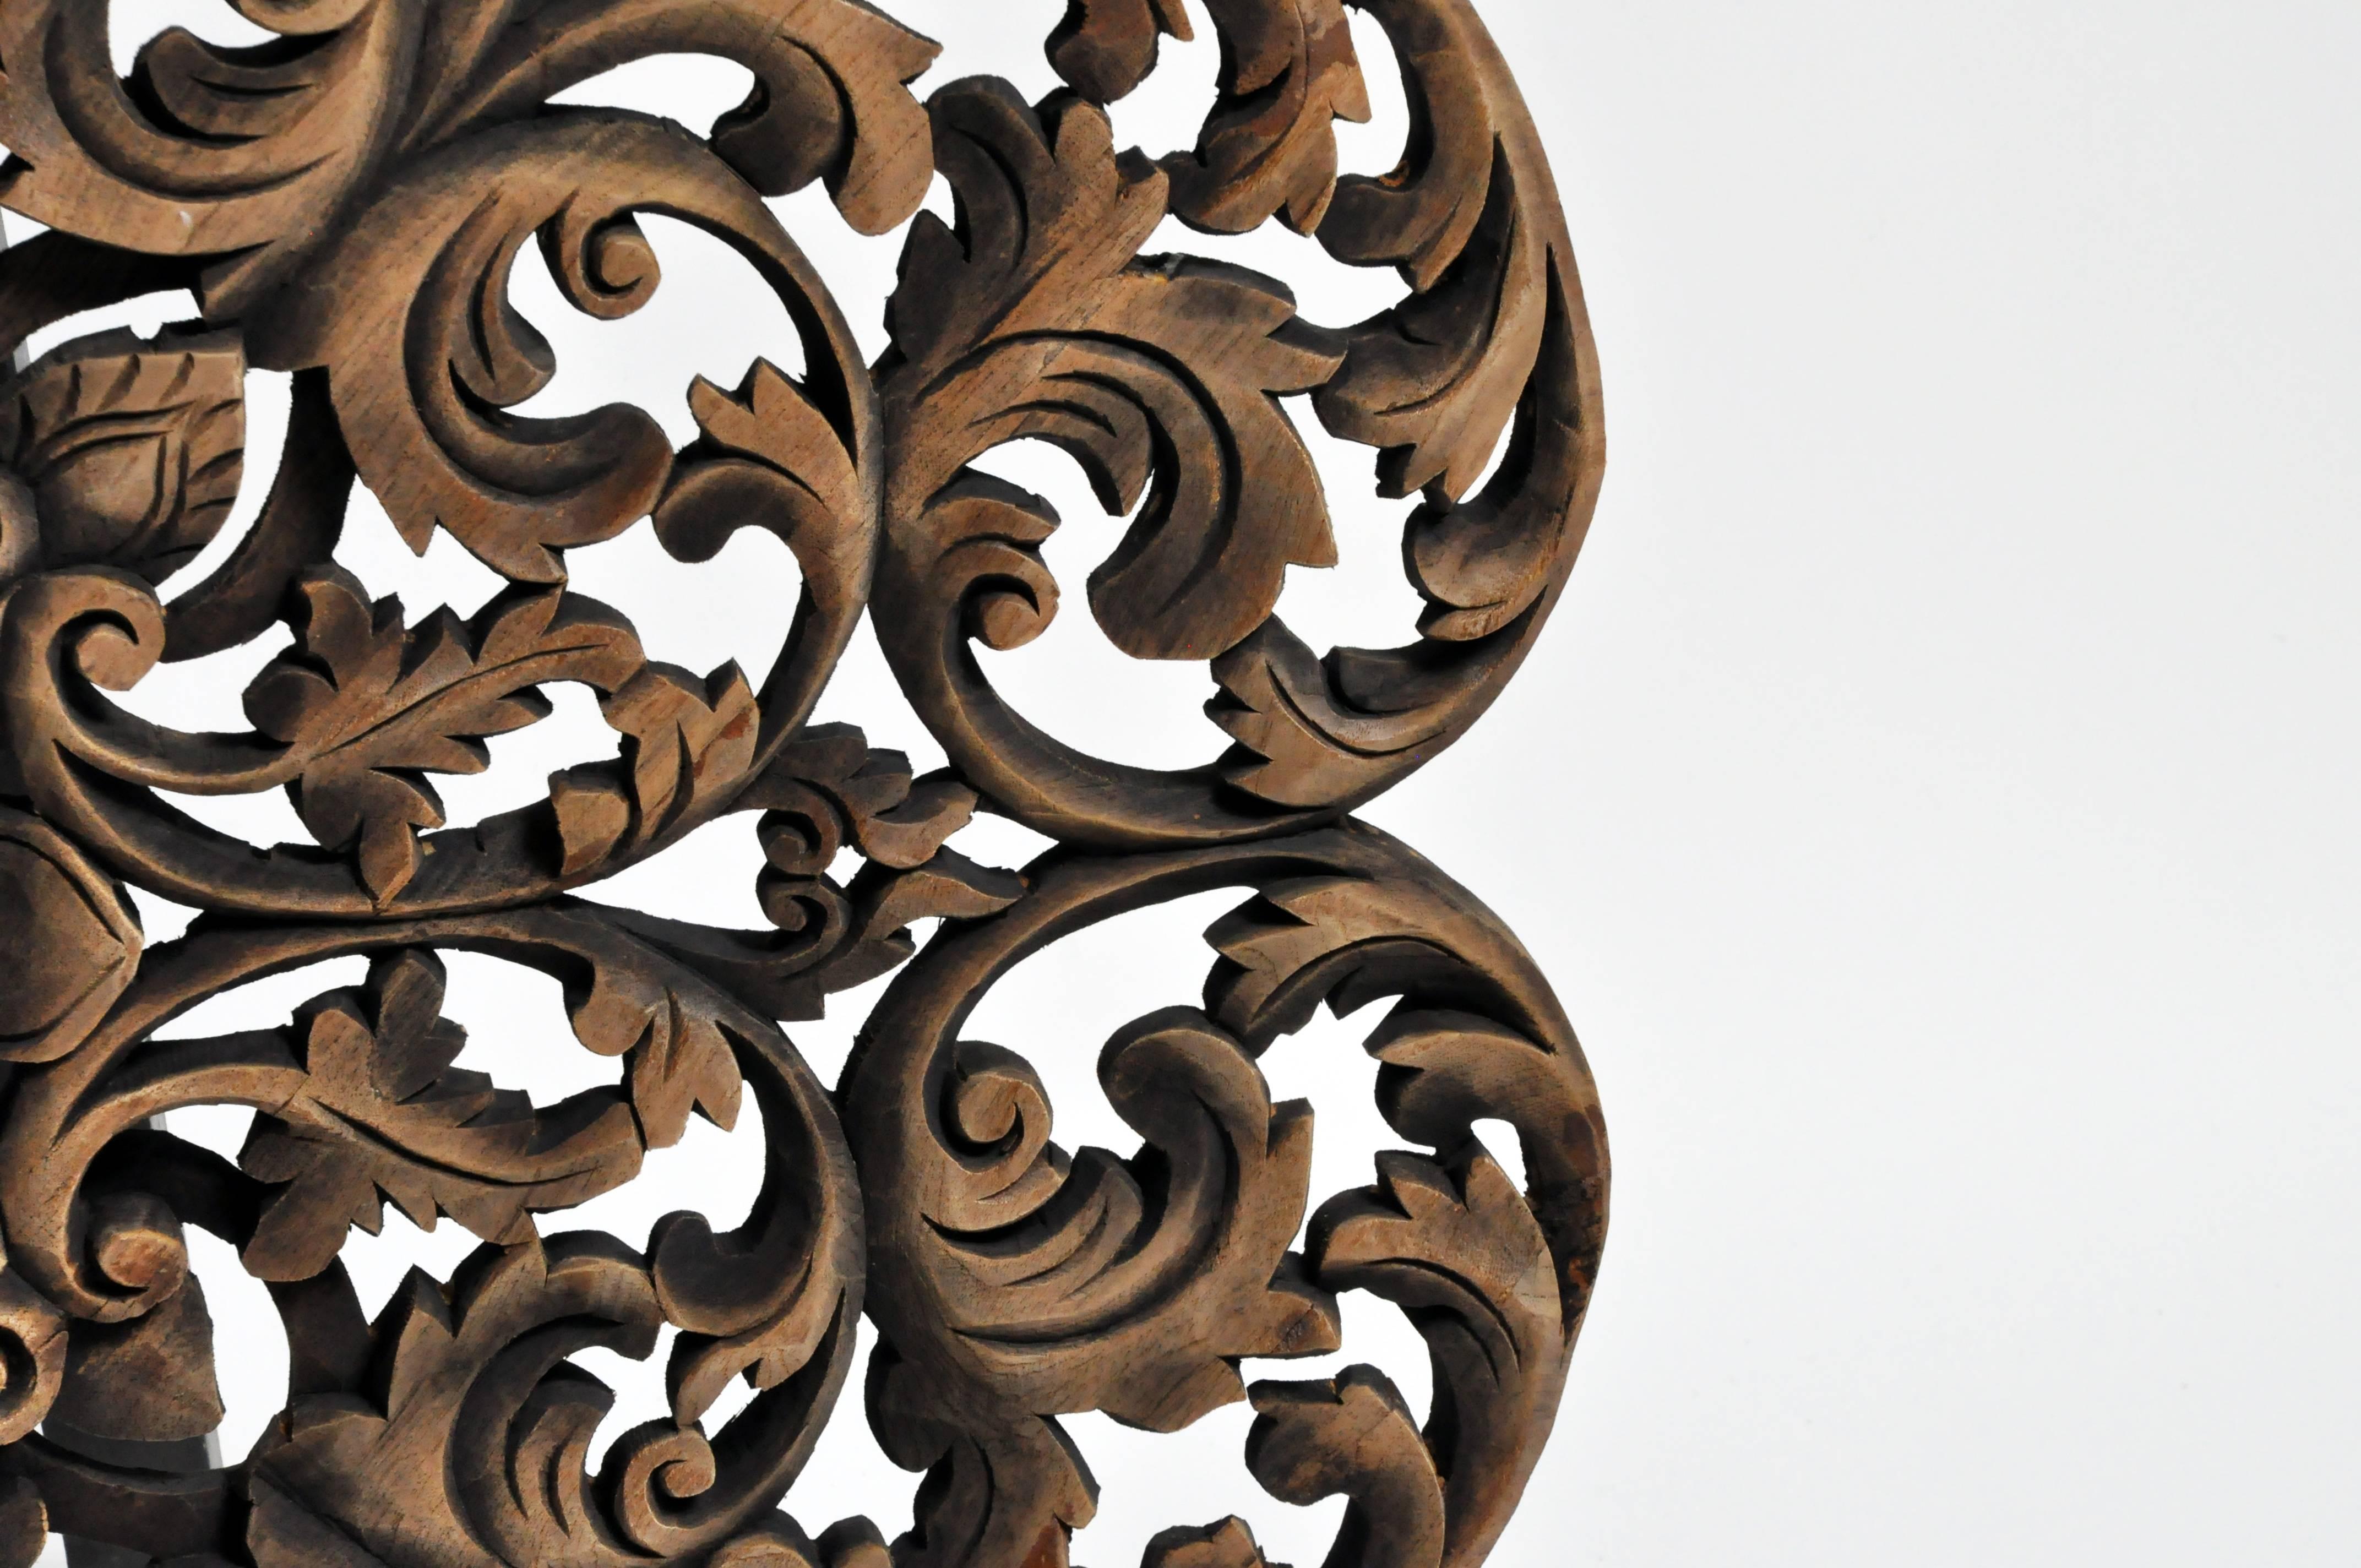 Southeast Asian Round Flower Wood Carving 1